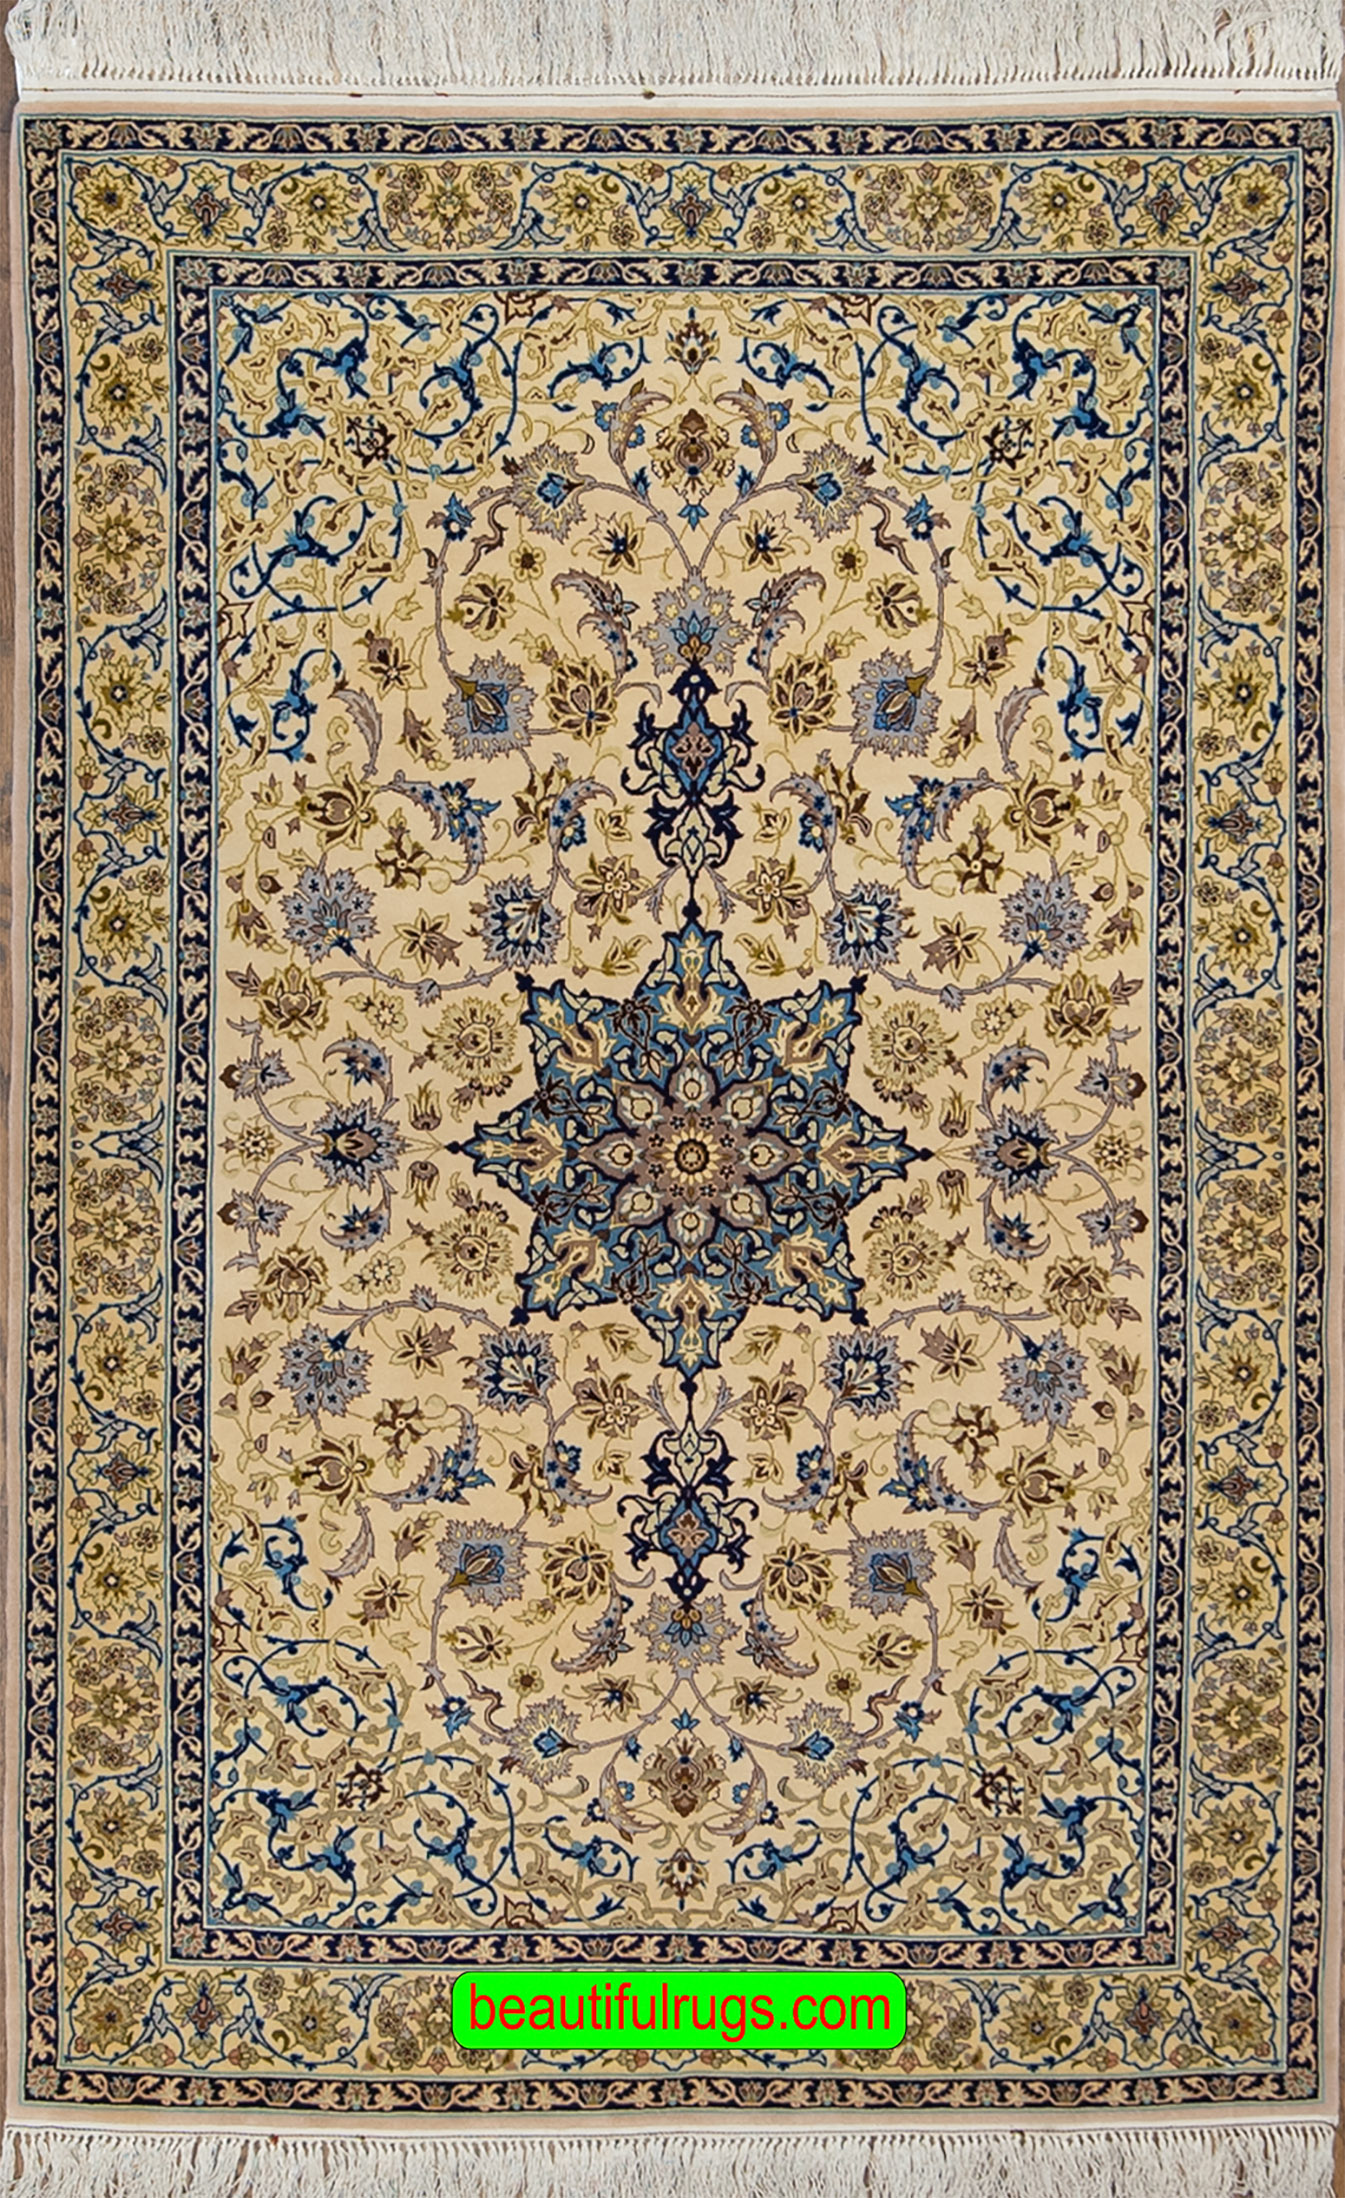 Beige and blue color Persian Isfahan rug by Sarraf Mamouri. Size 3.9x6.2